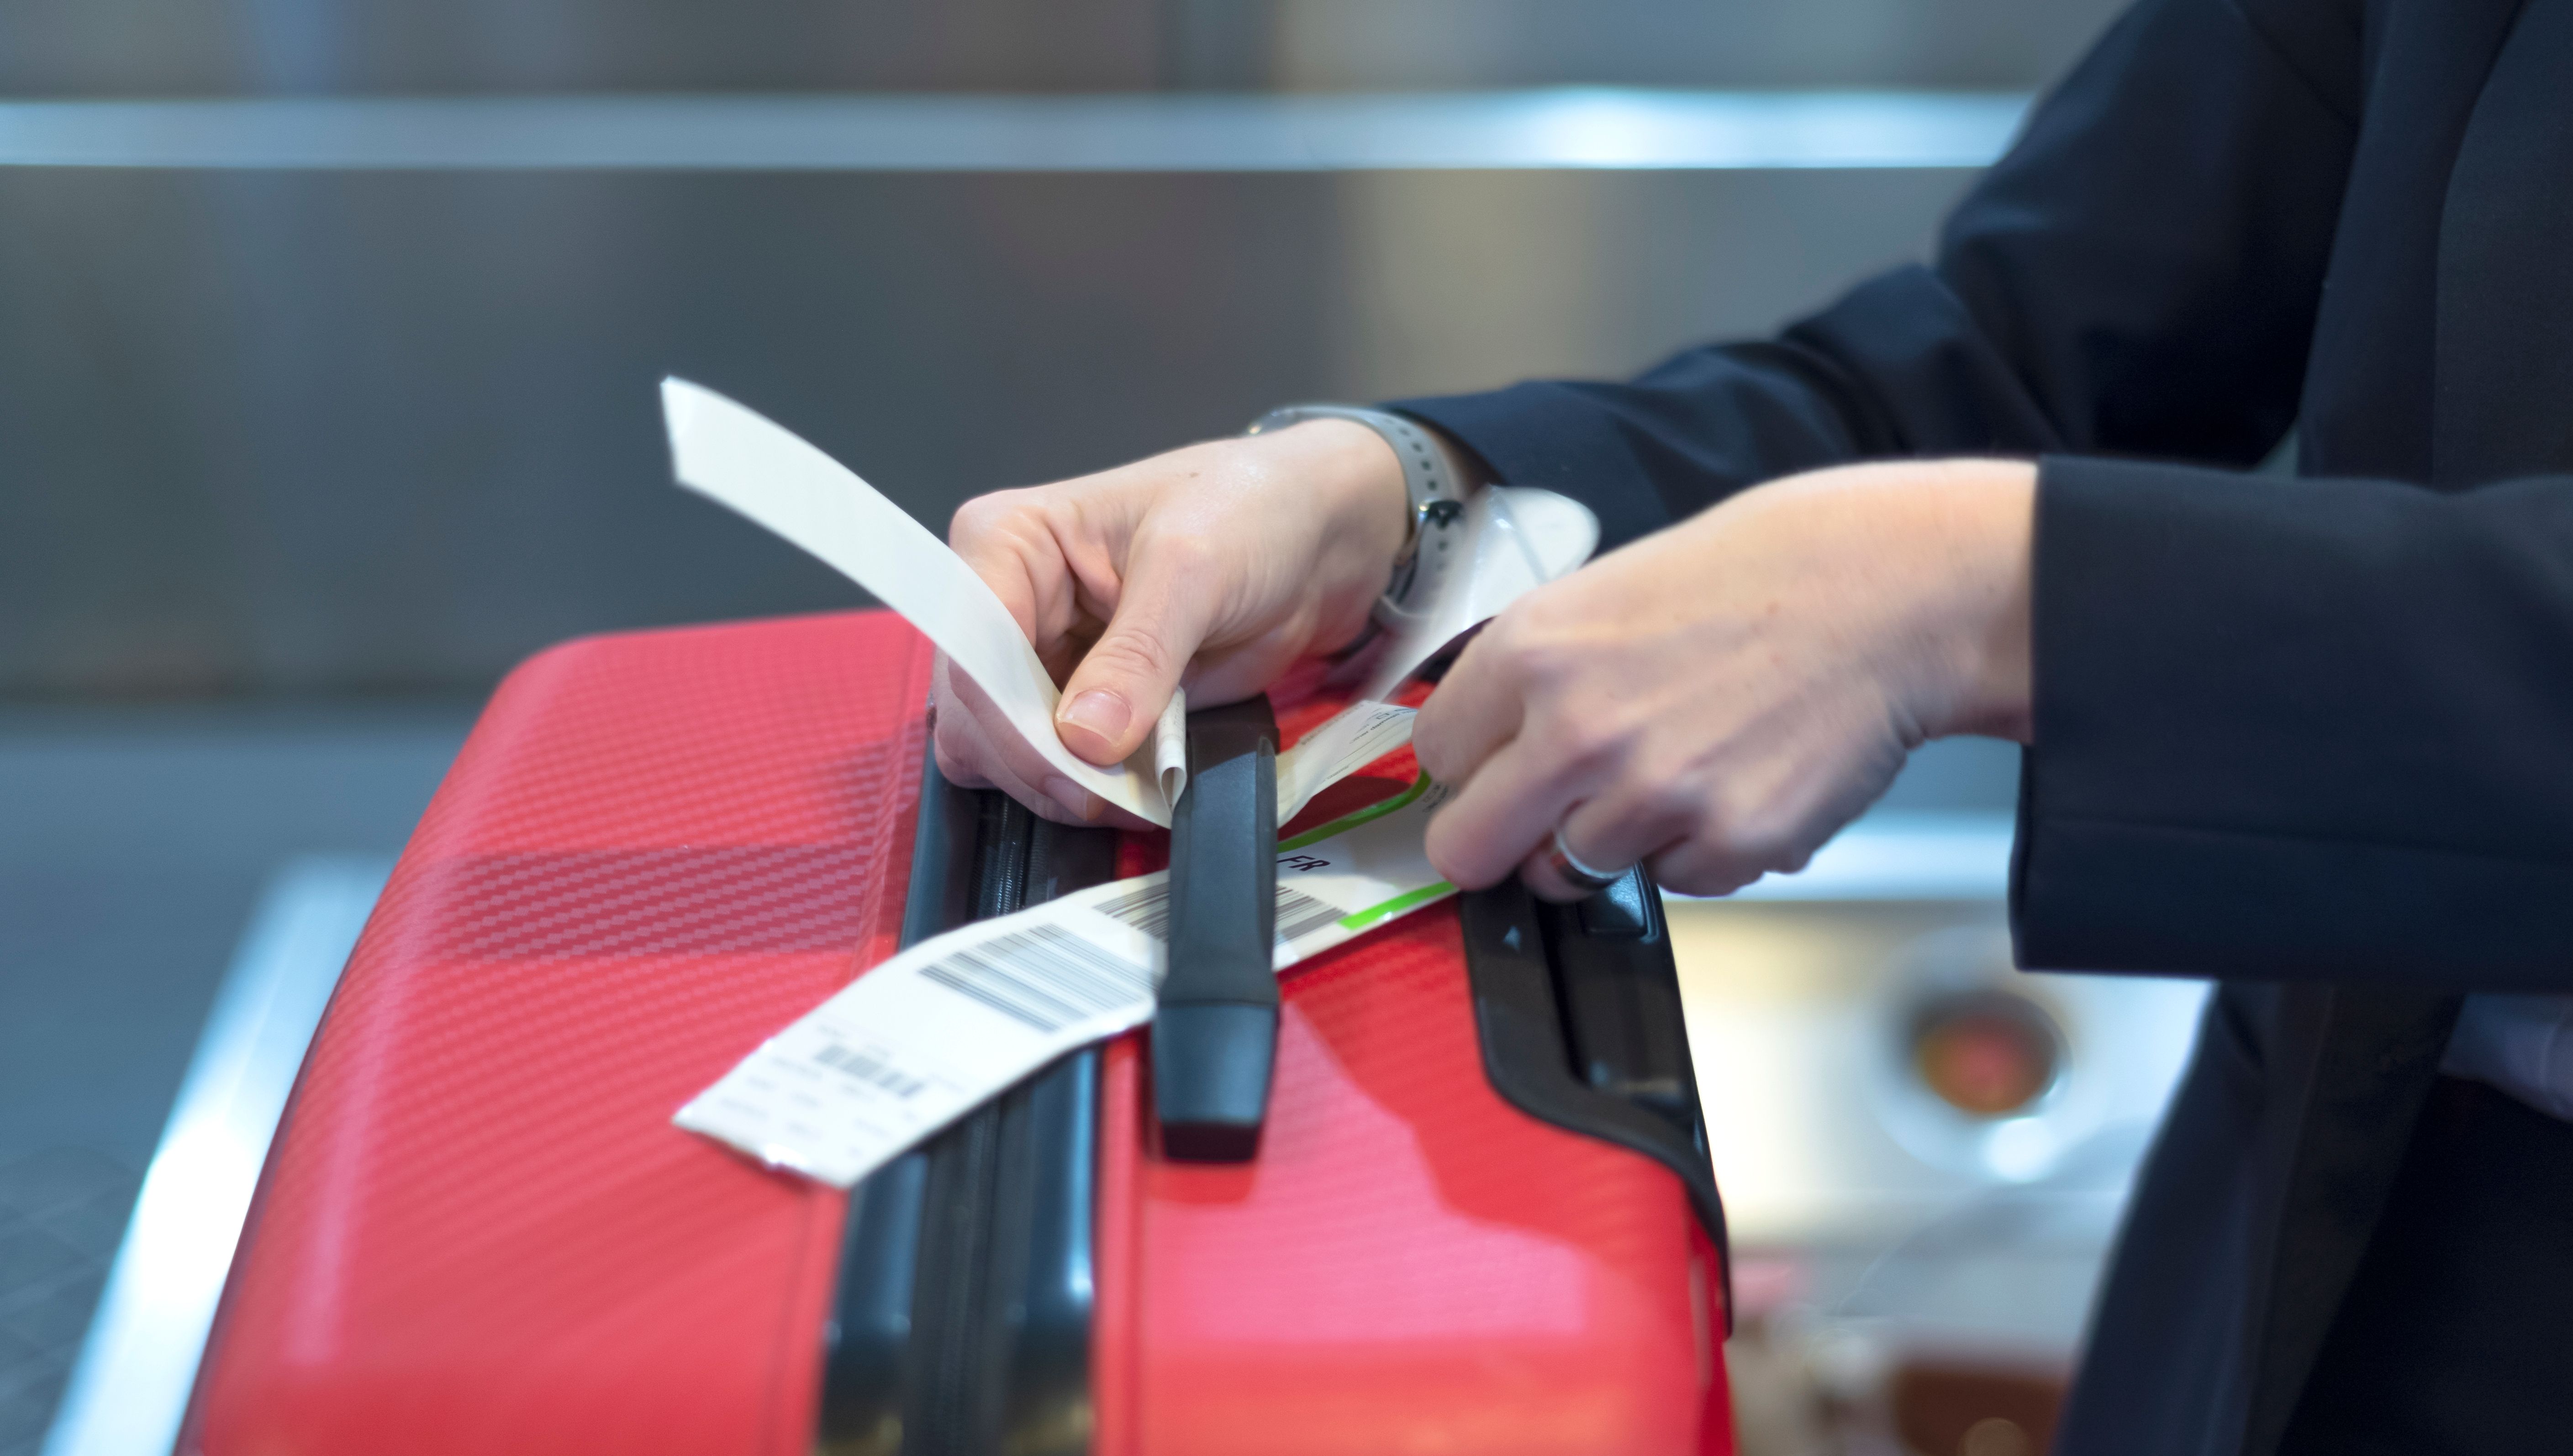 A check-in employee attaching a luggage tag to a suitcase.